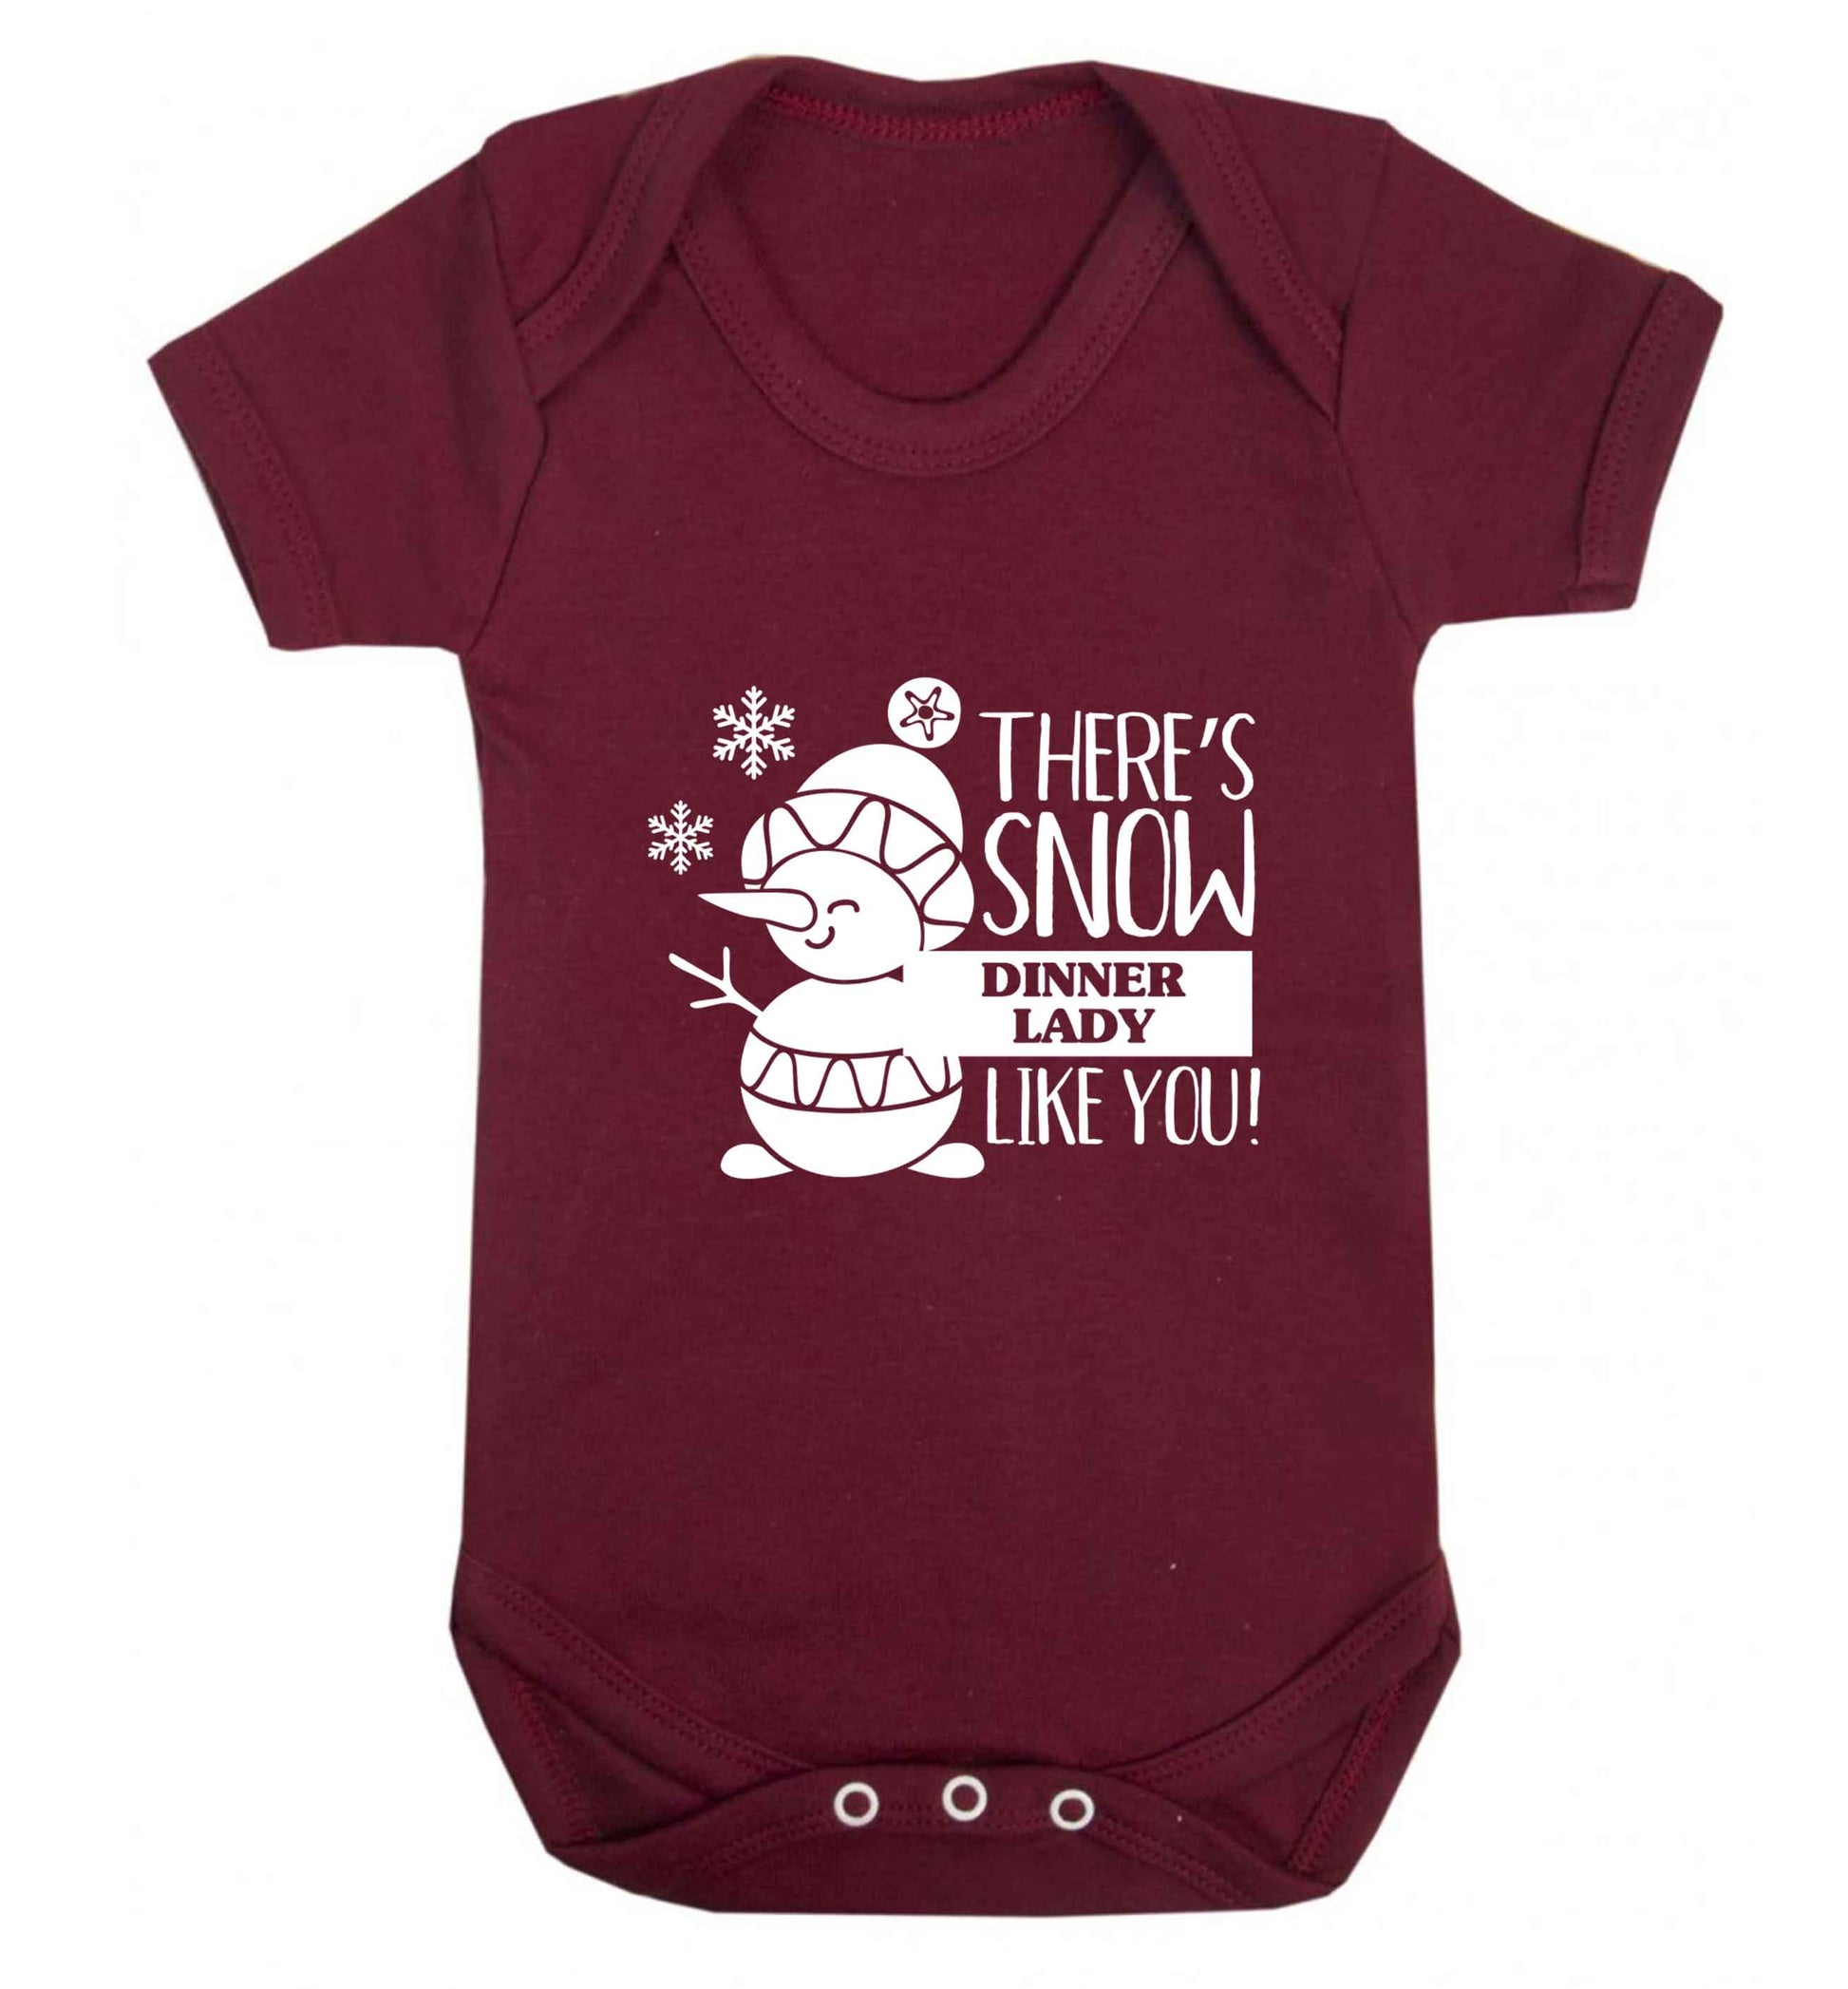 There's snow dinner lady like you baby vest maroon 18-24 months